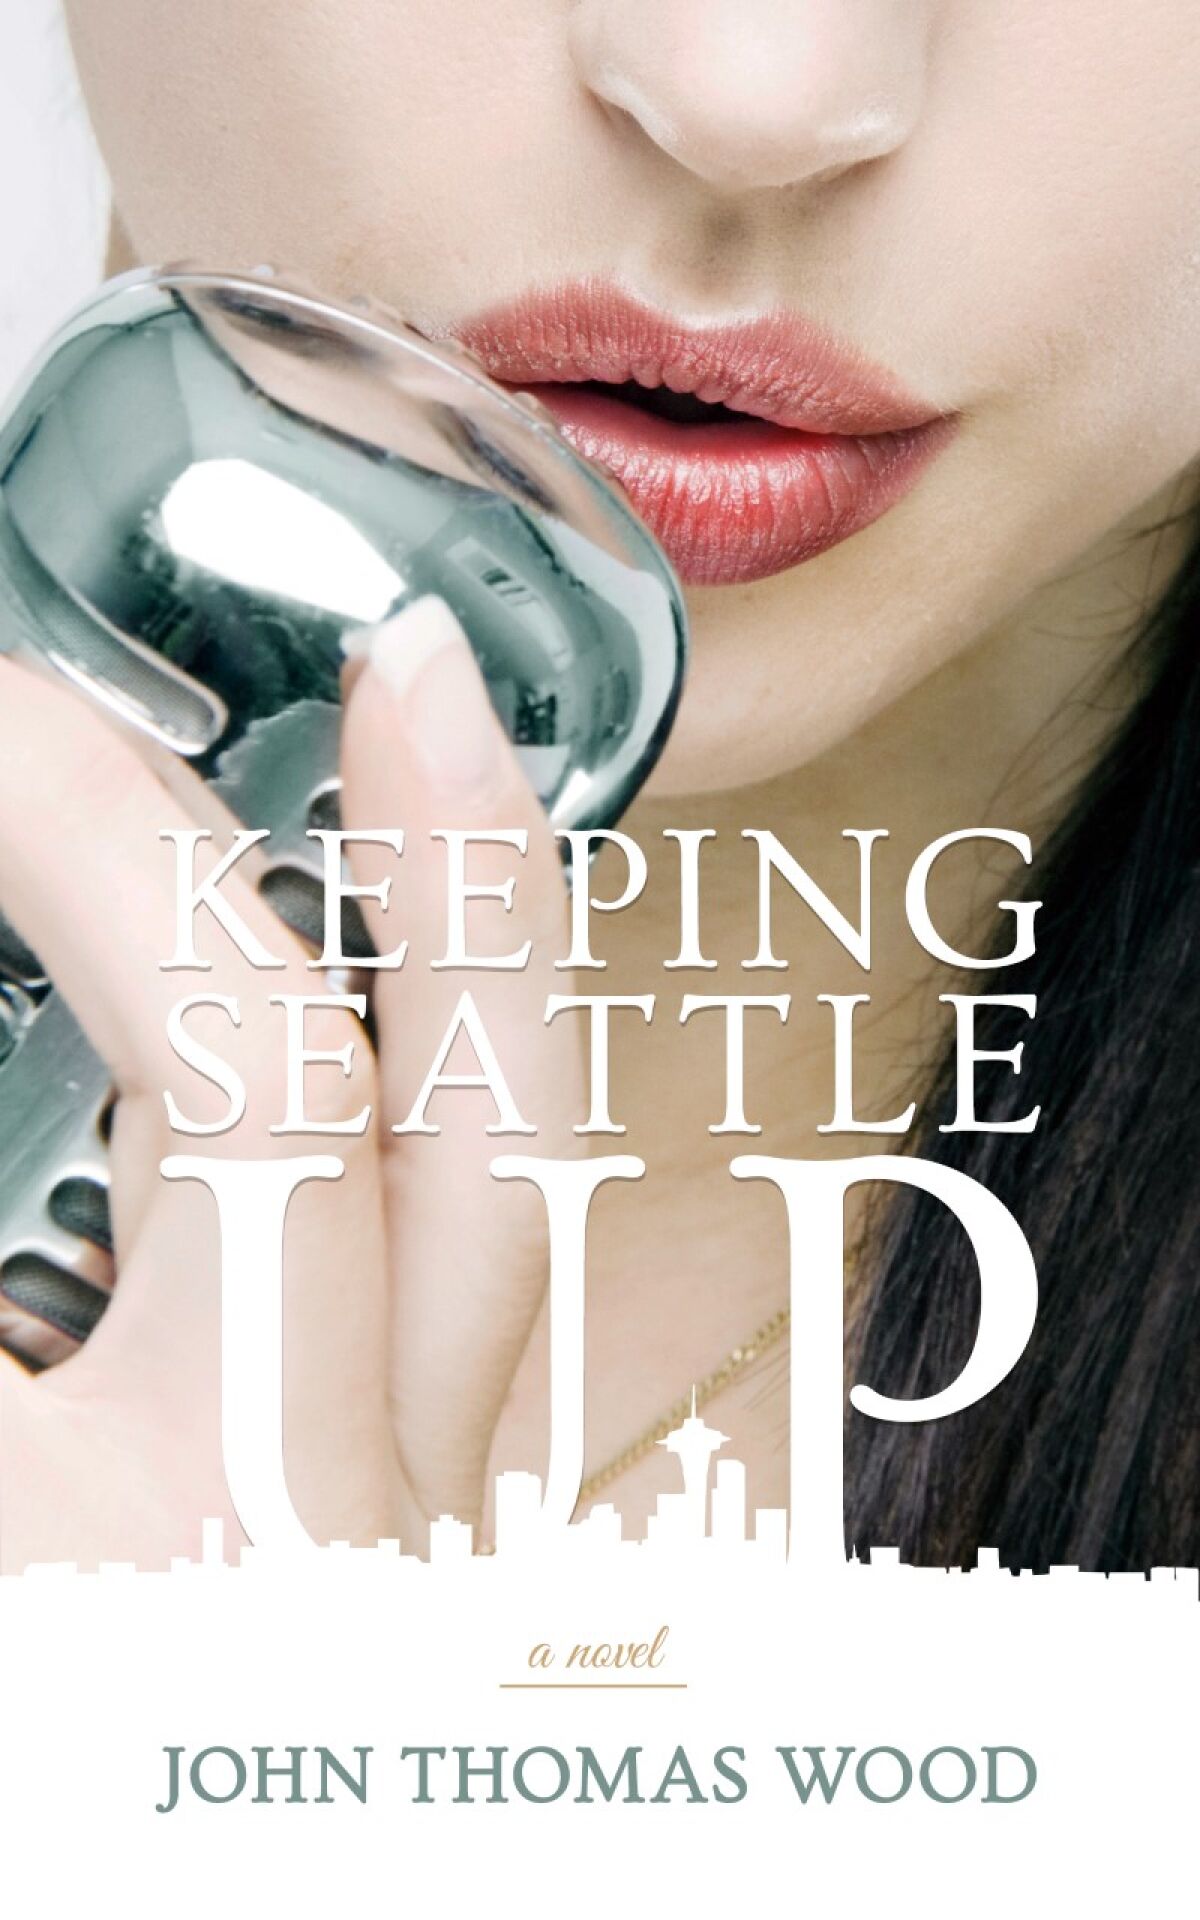 The cover of the novel "Keeping Seattle Up," written by John Thomas Wood.